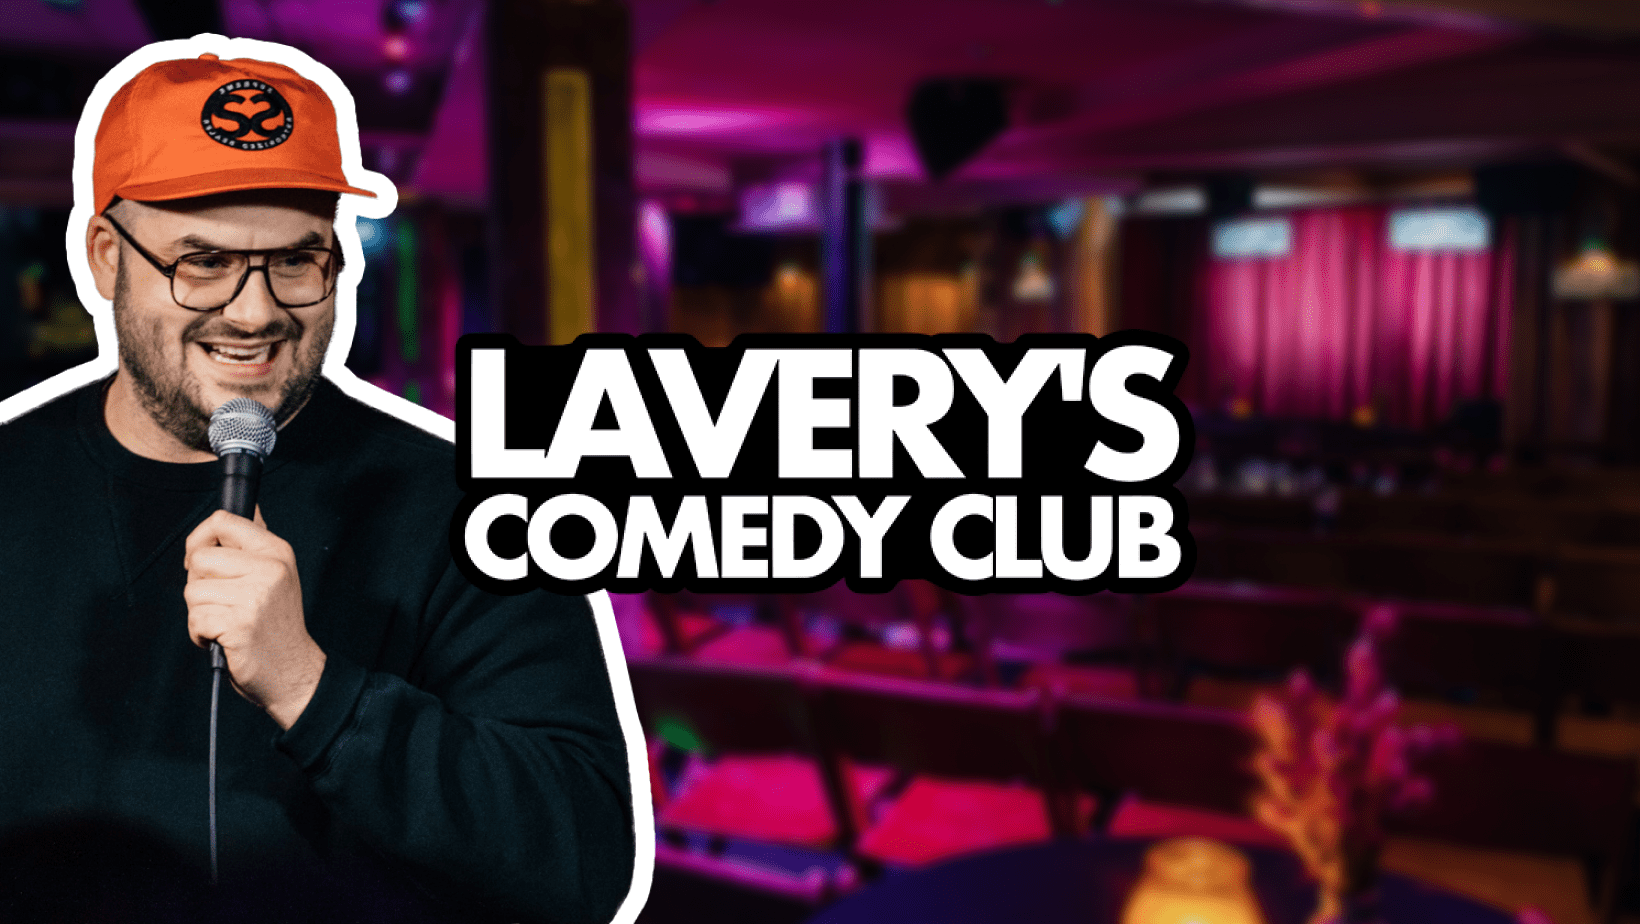 Lavery's Comedy Club banner image depicting Colin Geddis